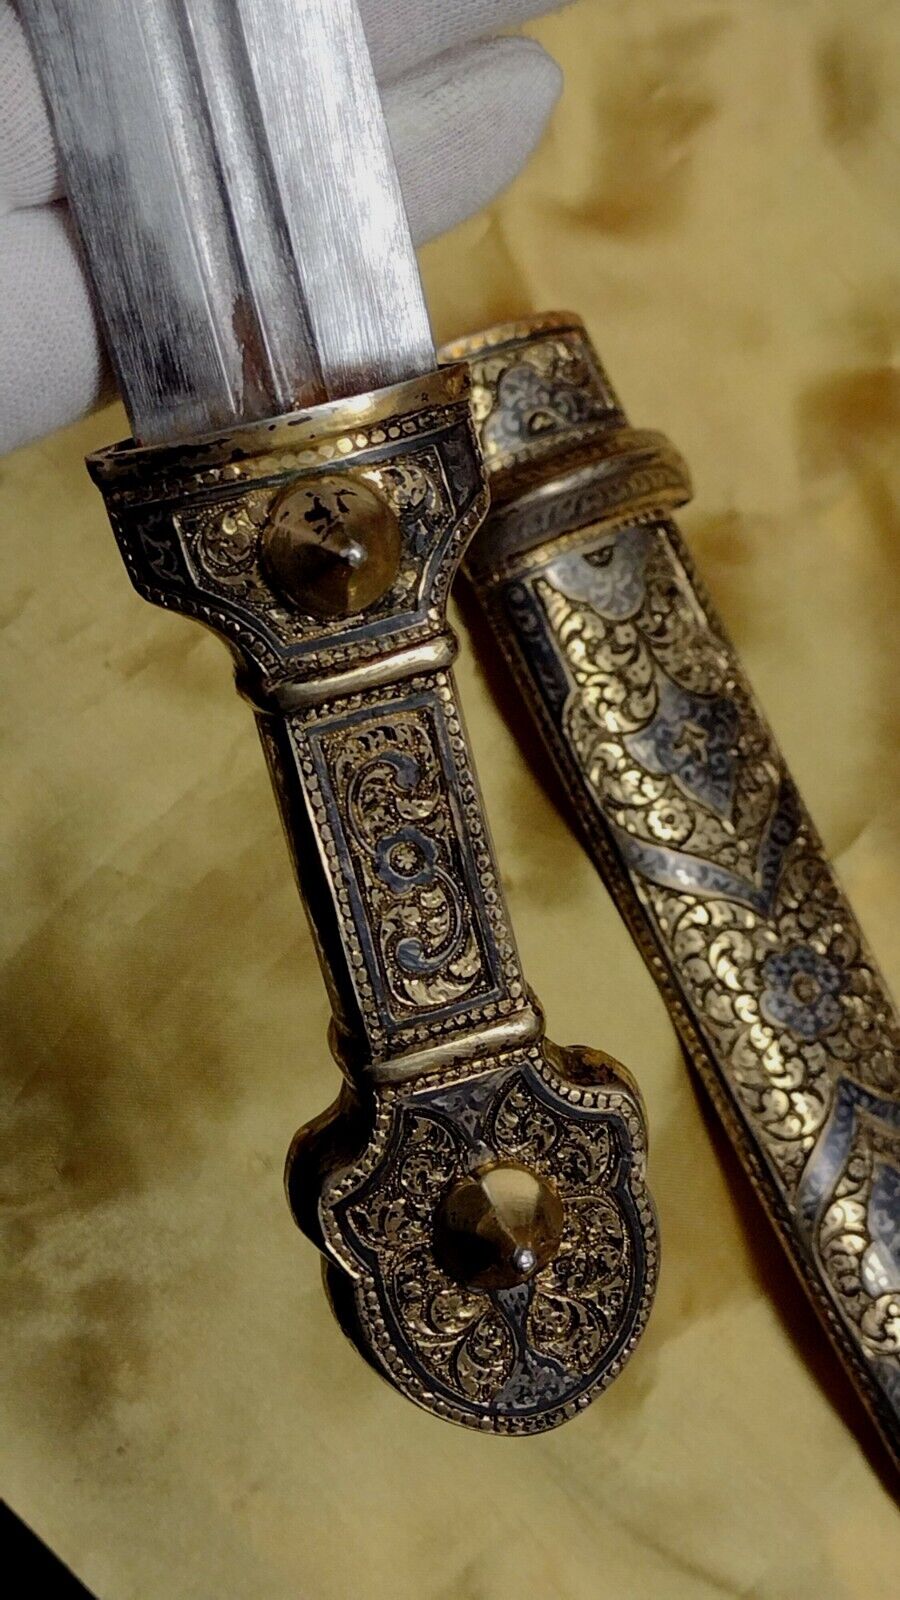 RARE ANTIQUEPRINCELY FAMILY DAGGER17/18th.CENTURY.STER.SILVER & 24K.GOLD COVER